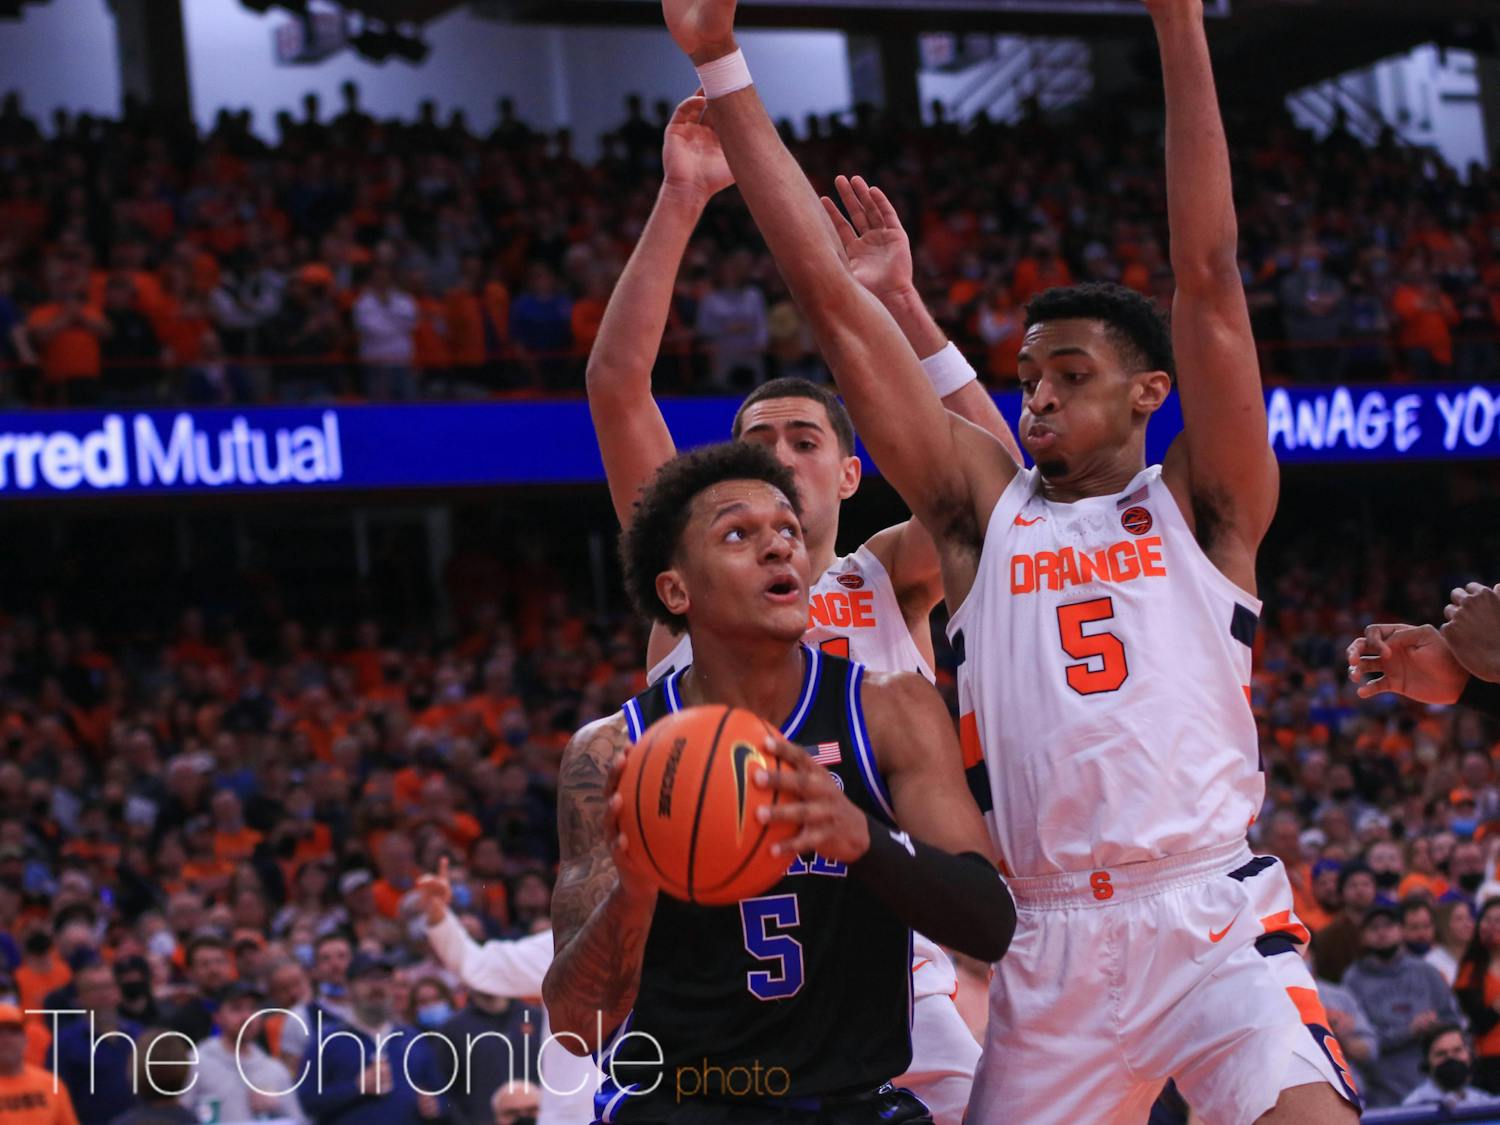 Paolo Banchero's 21 points gave Duke a major lift in its lopsided victory against Syracuse Saturday.